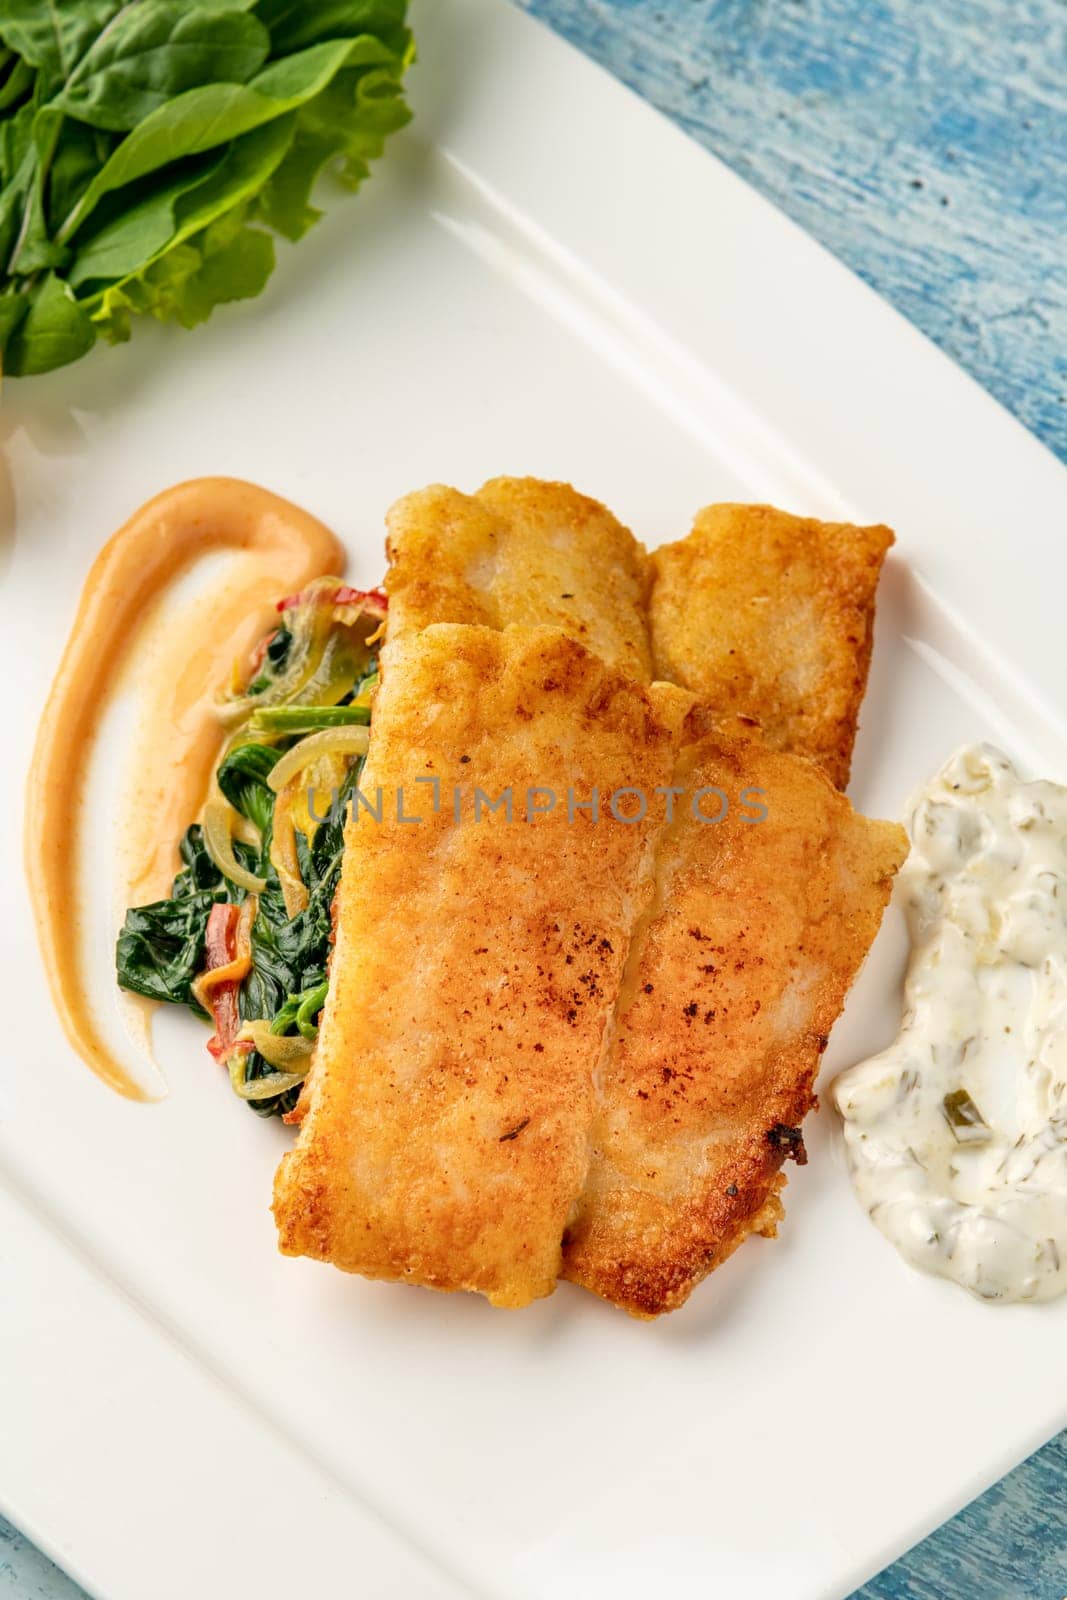 Fried Panga Fillet with greens and onions on the side and spinach underneath by Sonat